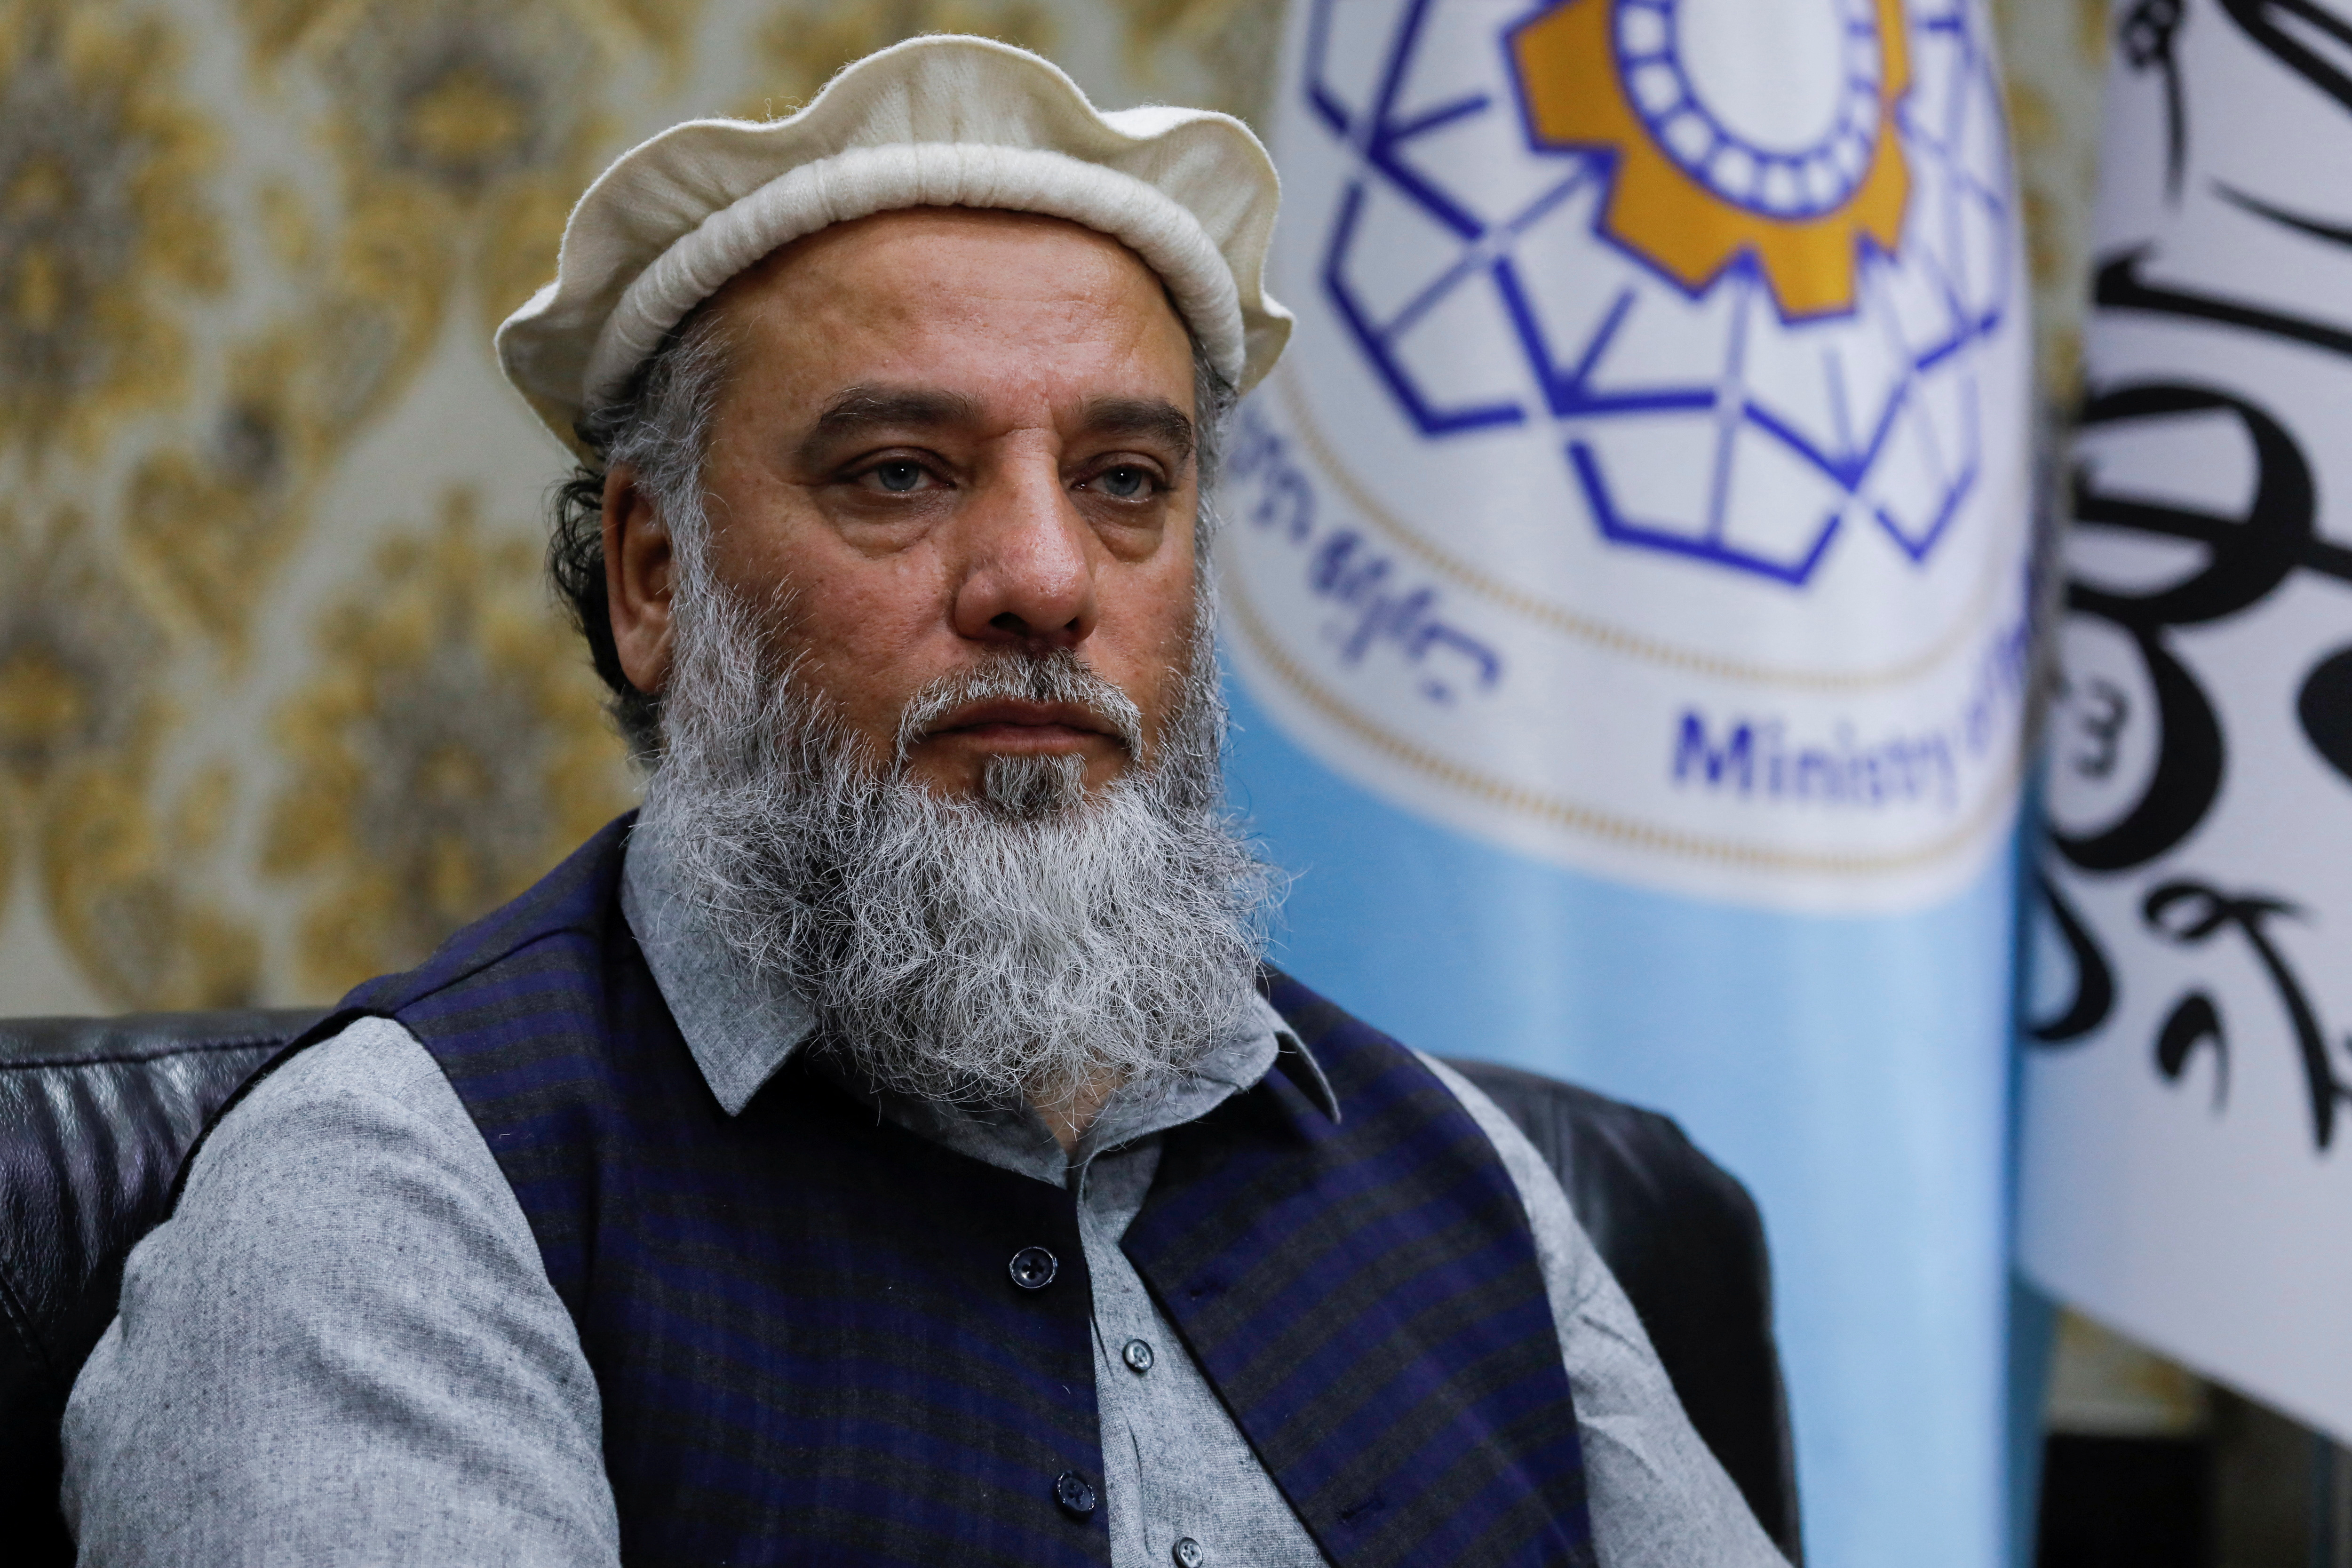 Nooruddin Azizi, acting Afghan Minster of Commerce and Industry, speaks during an interview with Reuters in Kabul